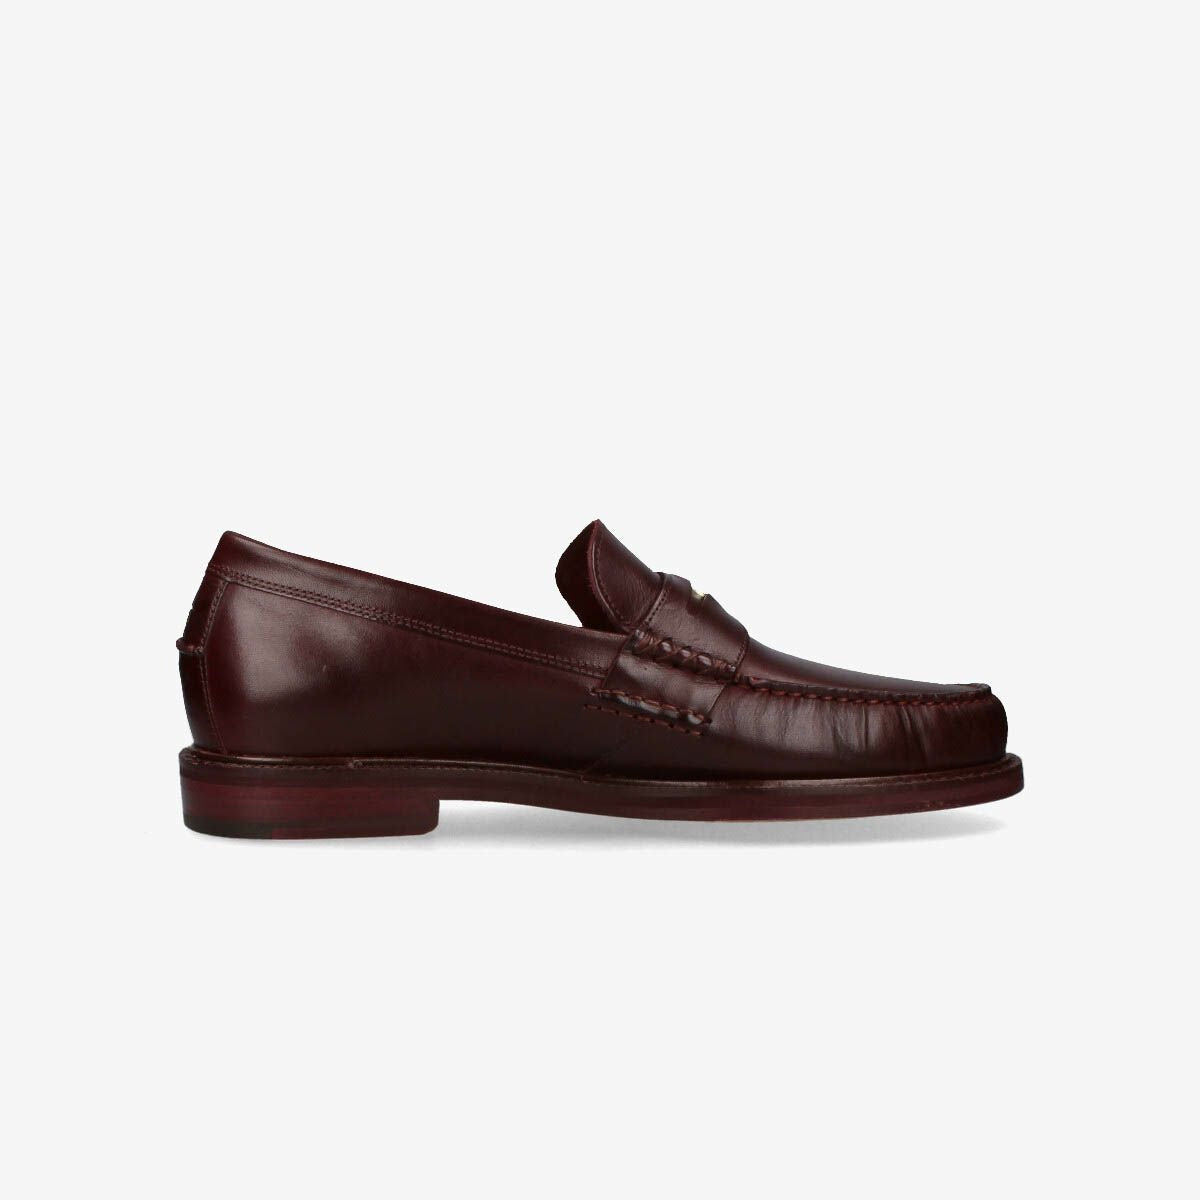 COLE HAAN AMERICAN CLASSICS PINCH PENNY LOAFER CH BLOODSTONE c37772 ...